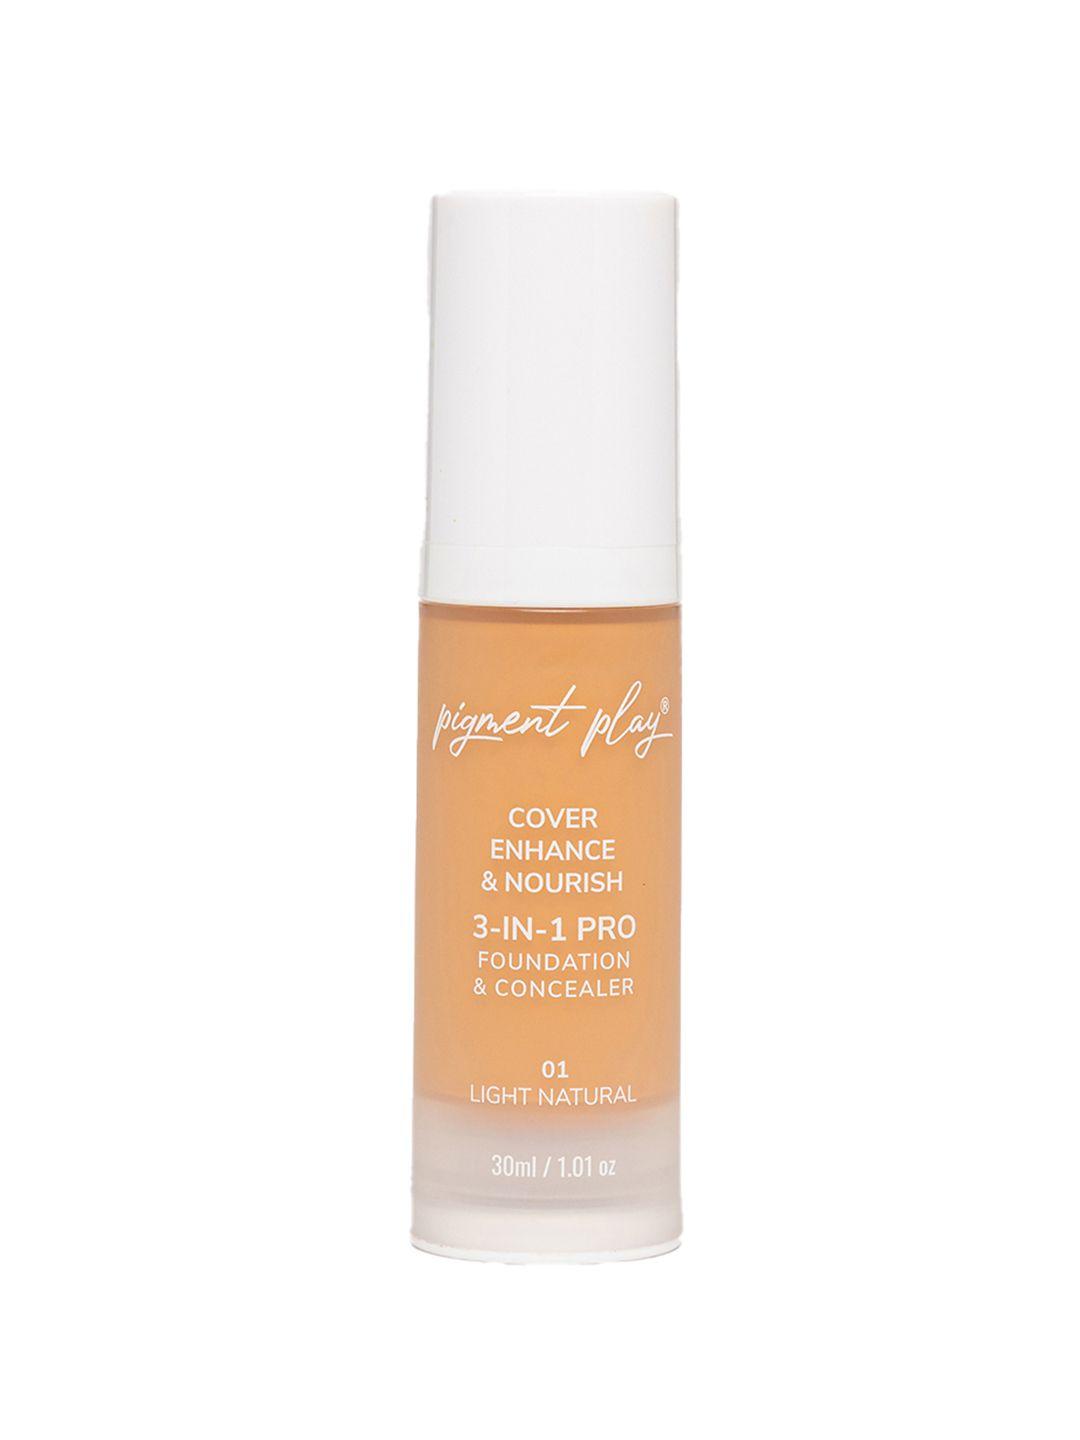 pigment play cover enhance & nourish 3-in-1 pro foundation & concealer - light natural 01